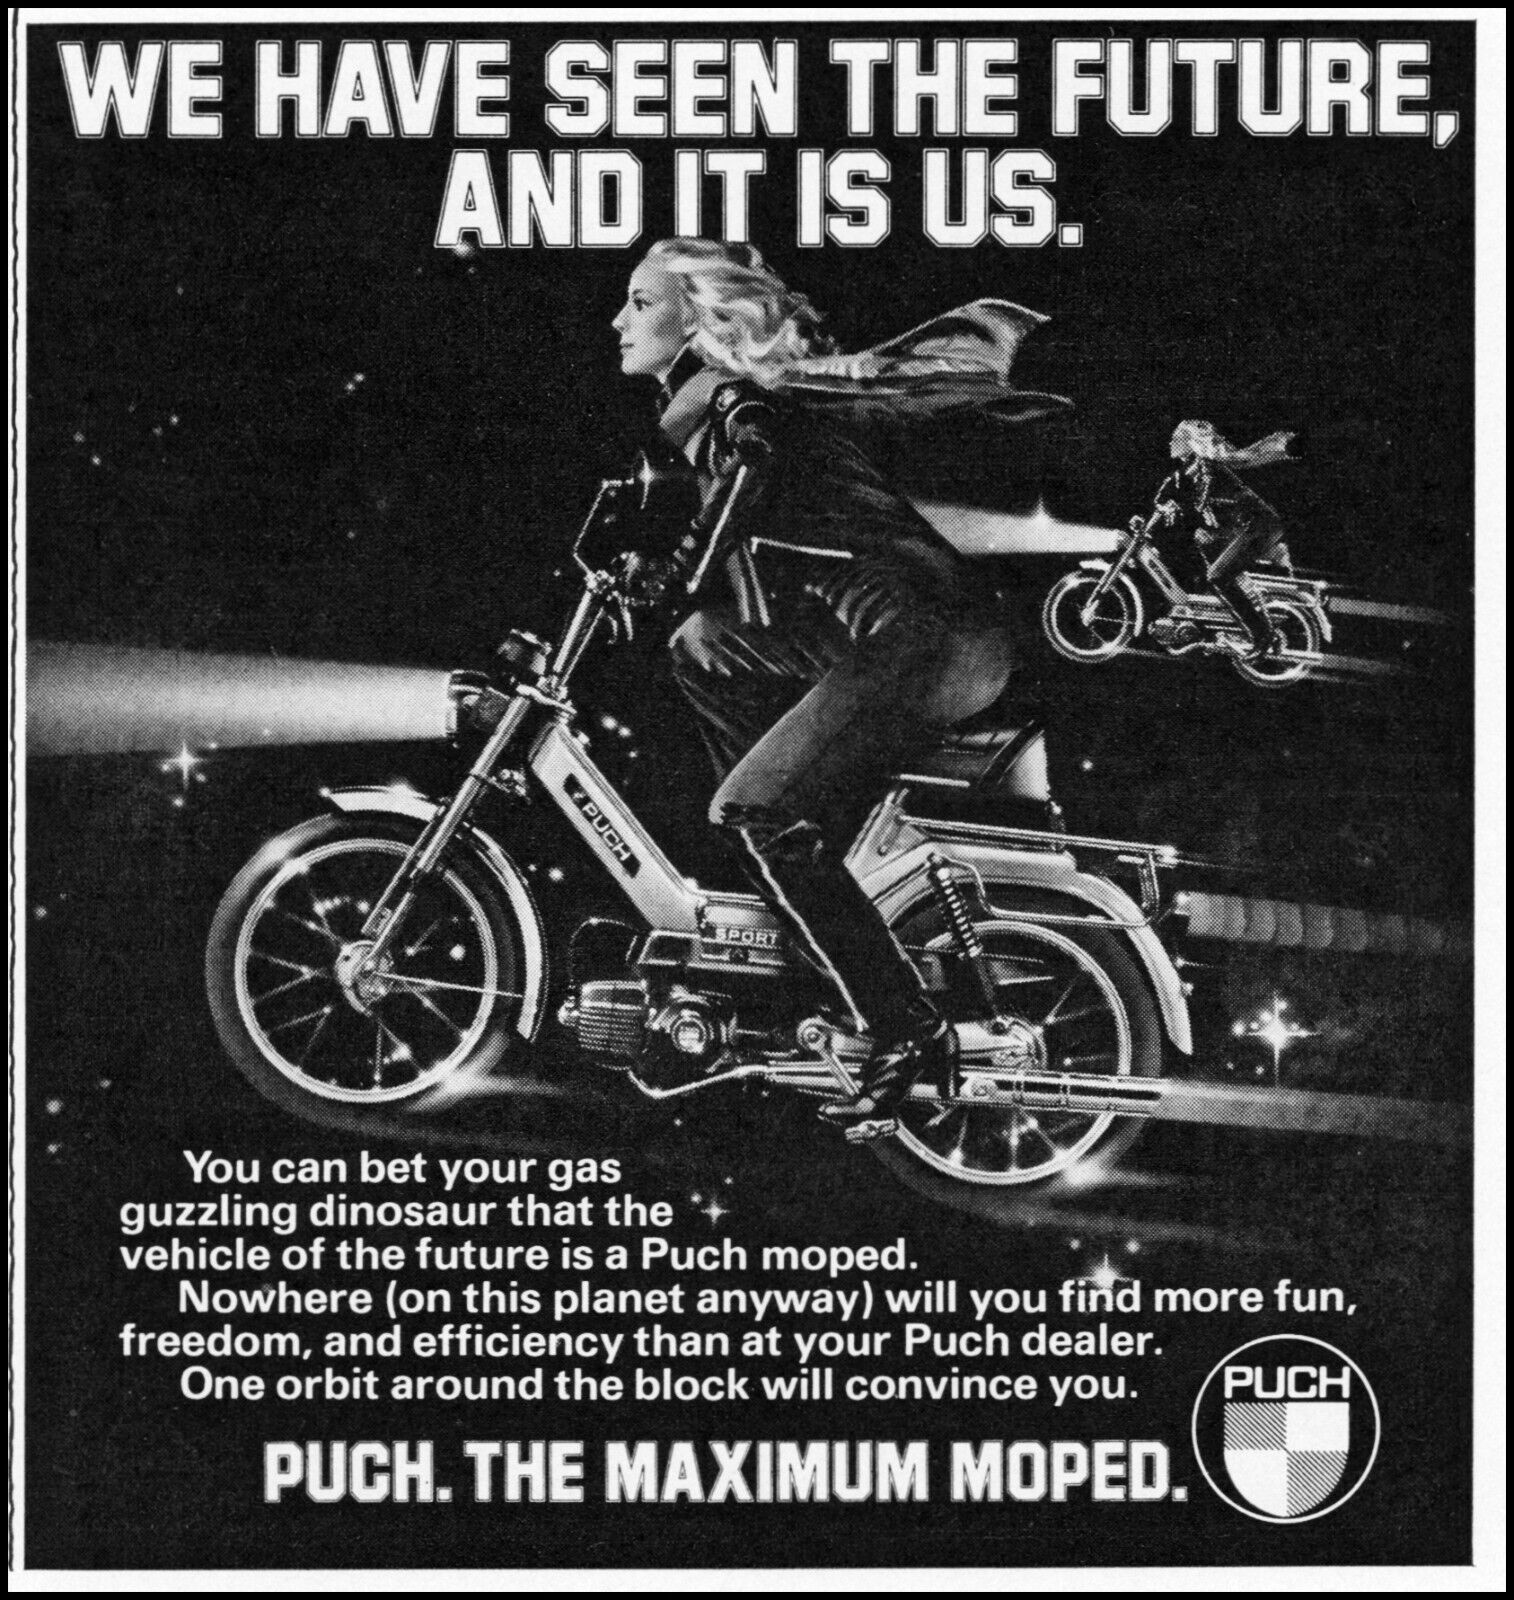 1978 Puch Maxi Moped Girl Riding Cycle Motorbike Retro Photo Print Ad Ads30